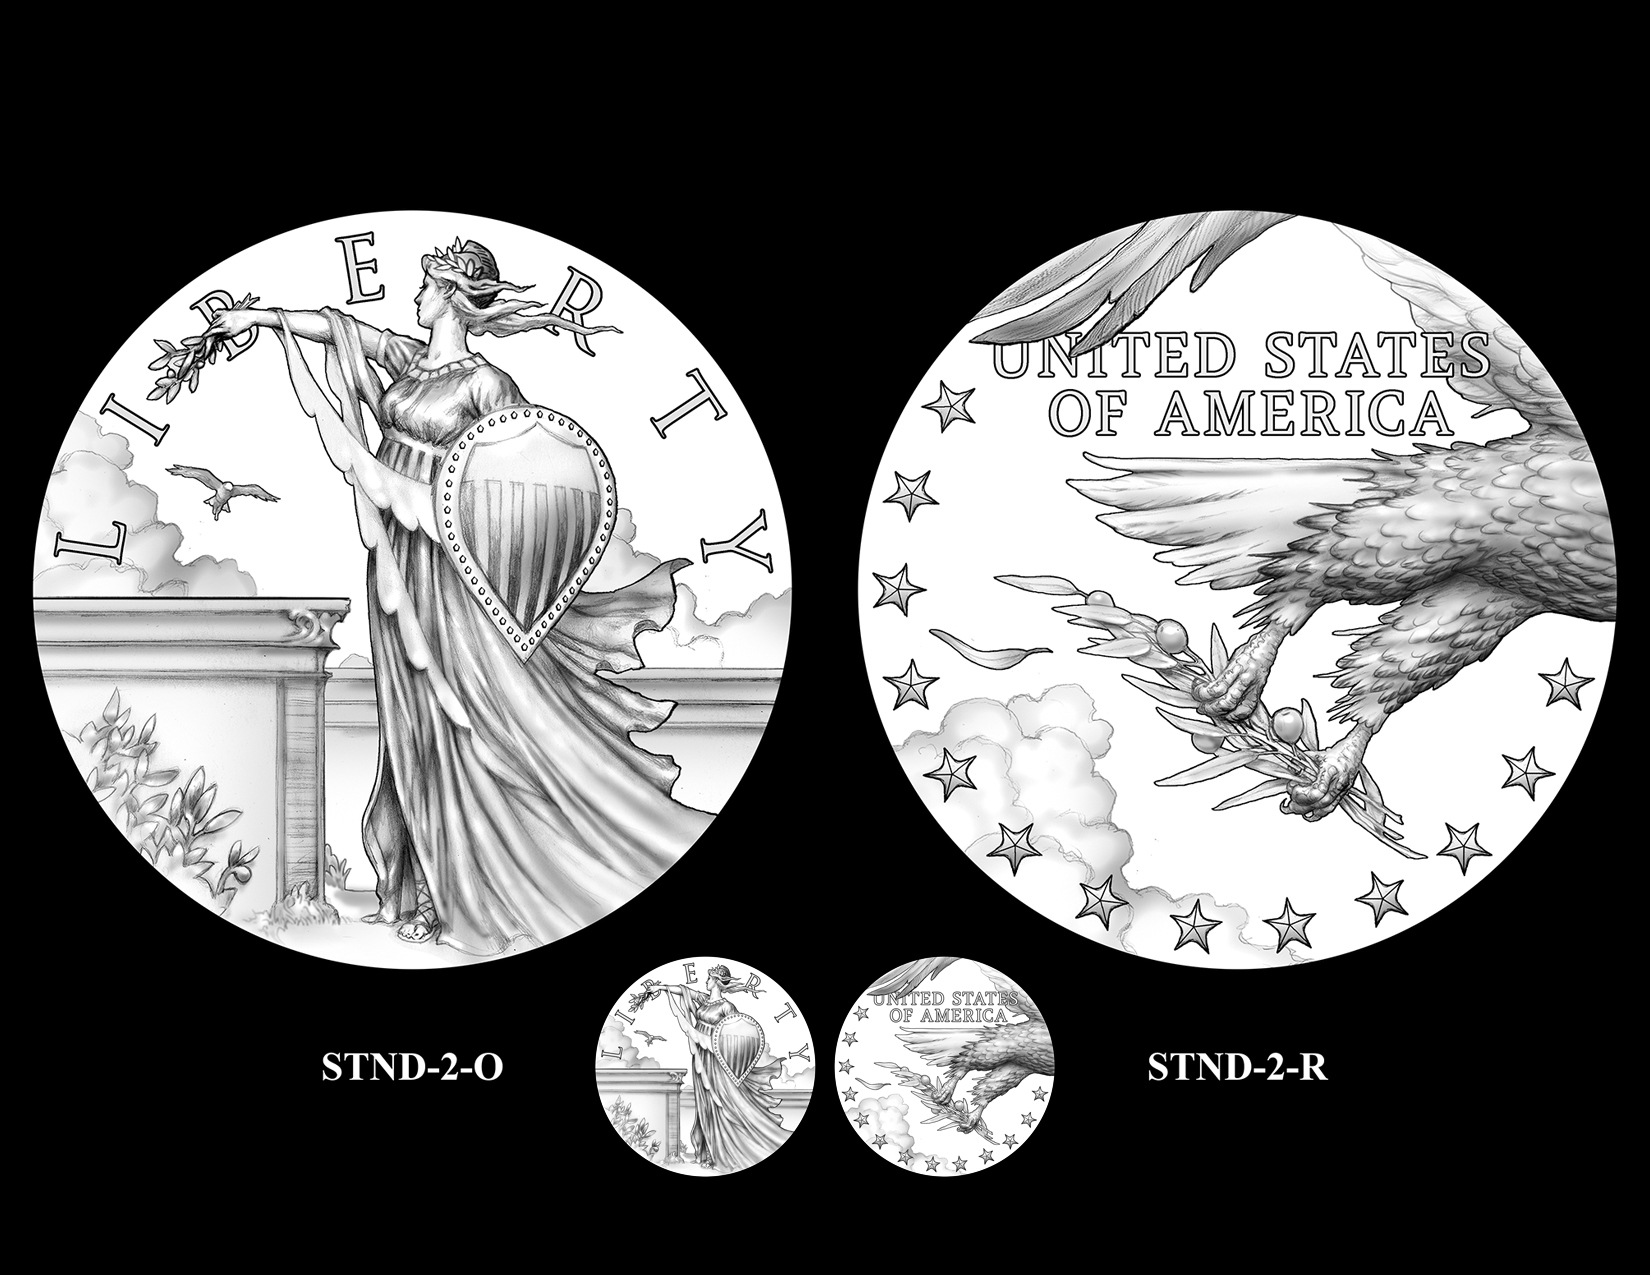 STND-2 -- Best of the Mint Silver Companion Medal